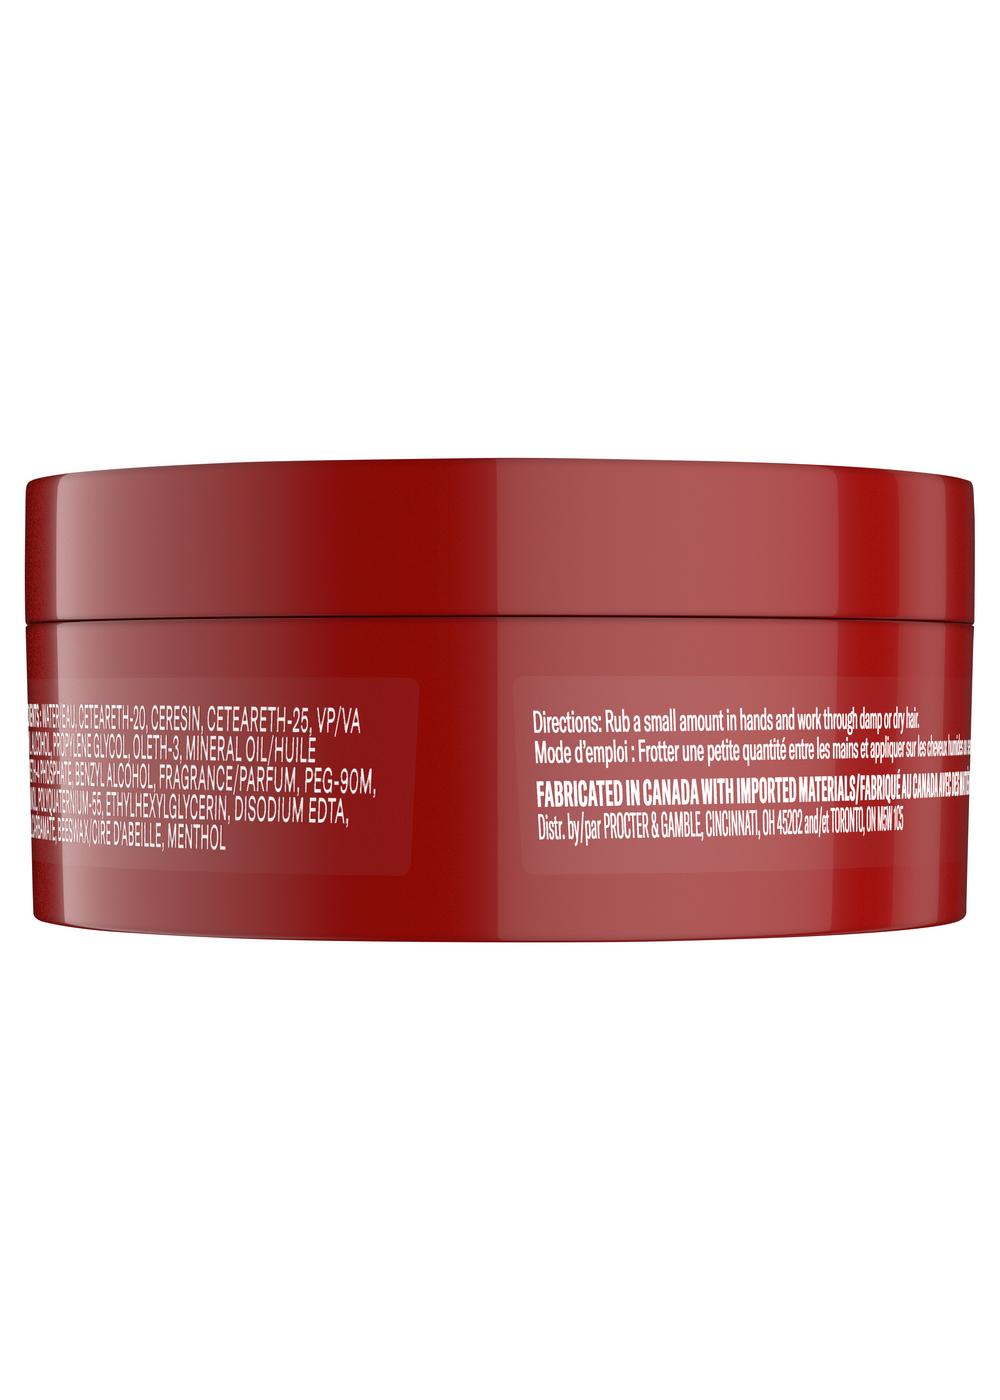 Old Spice Fiji Hair Styling Pomade for Men; image 9 of 9